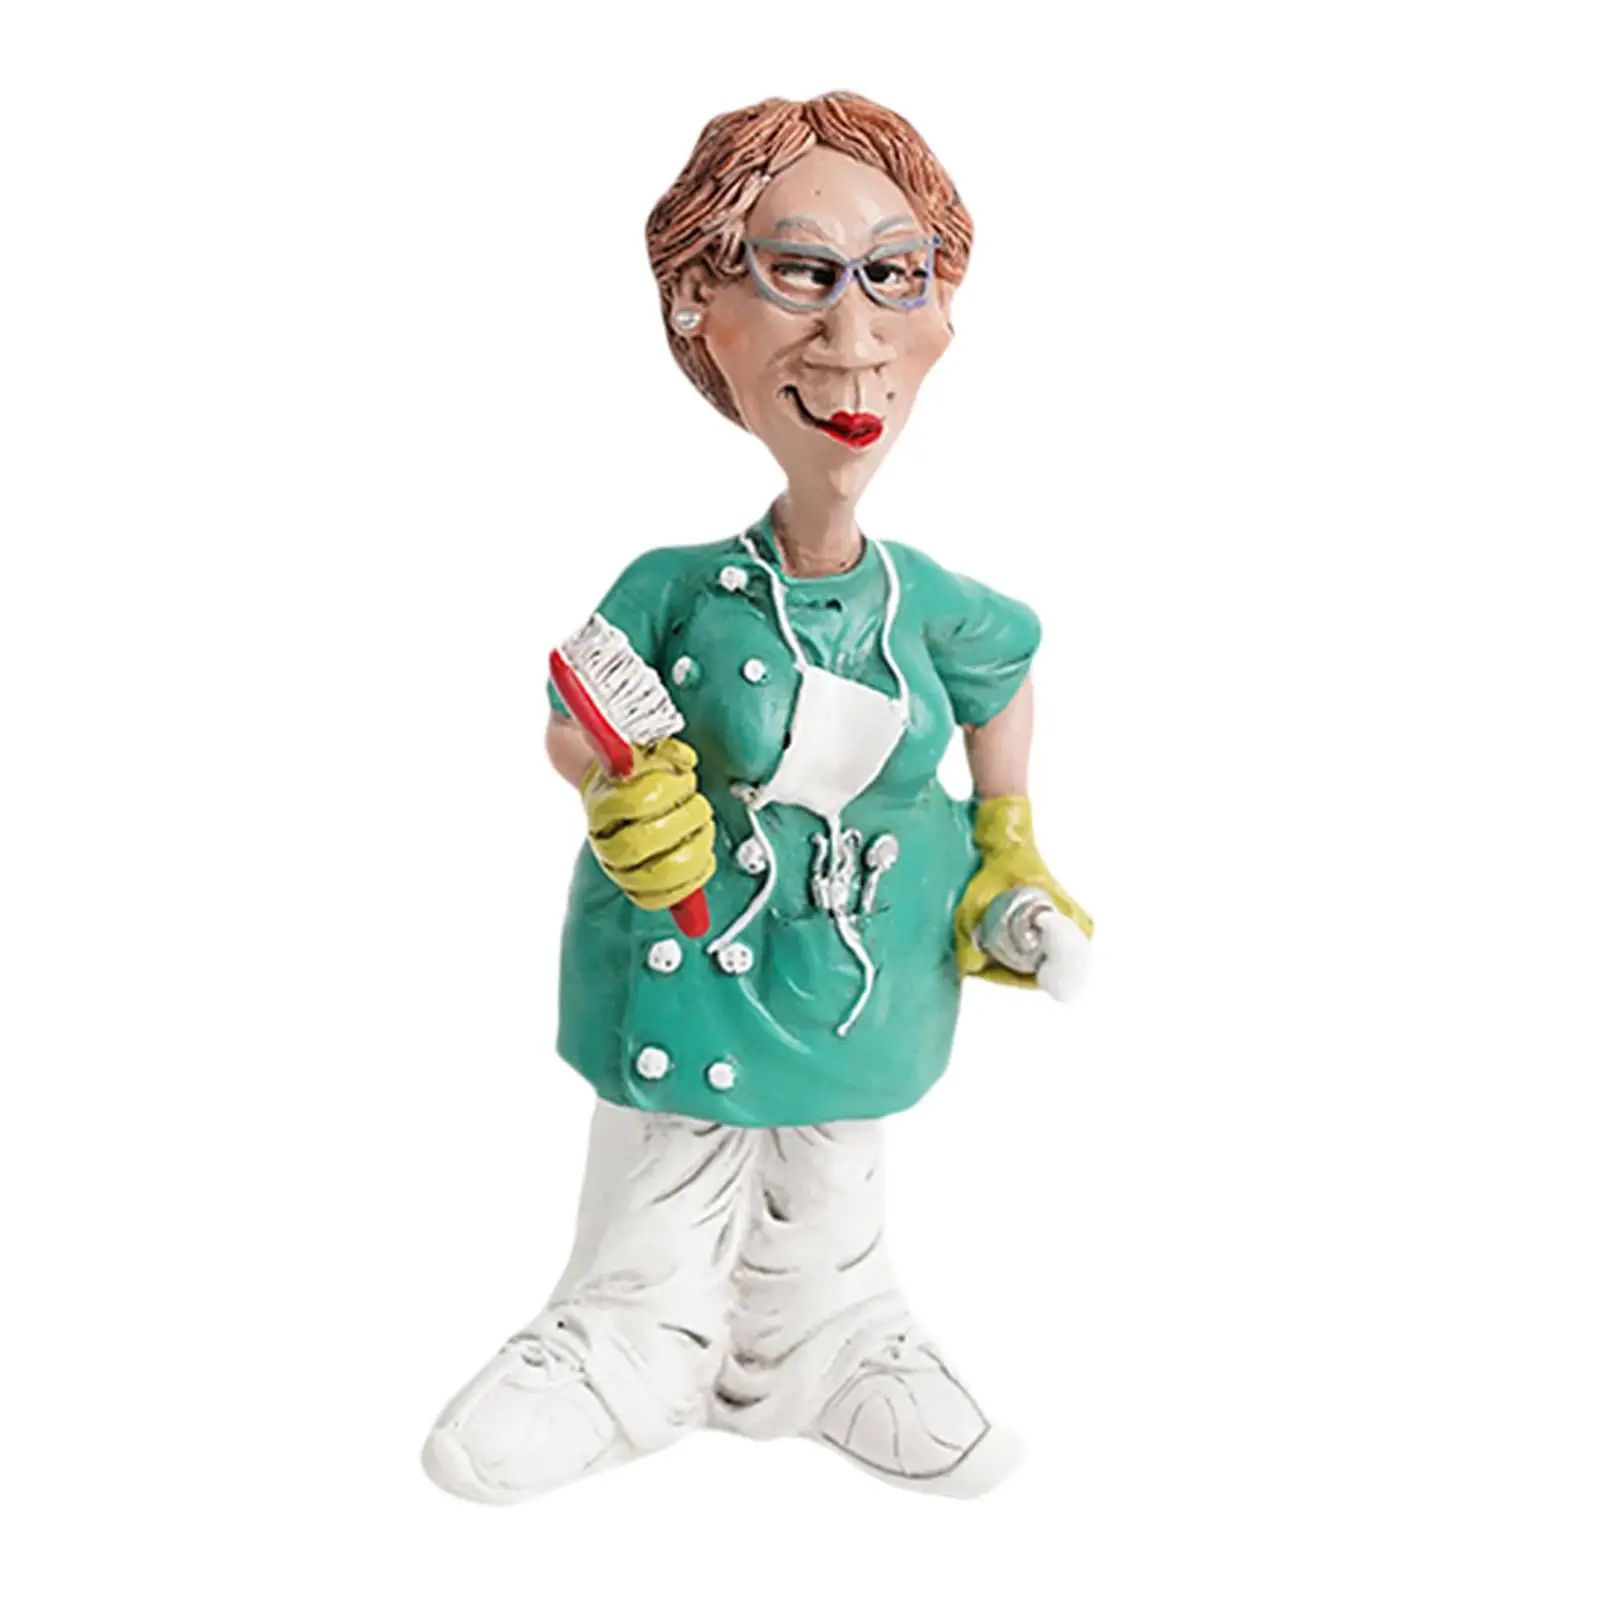 Modern Doctor Statues Figurines Decors Women Resin Sculpture for Living Room